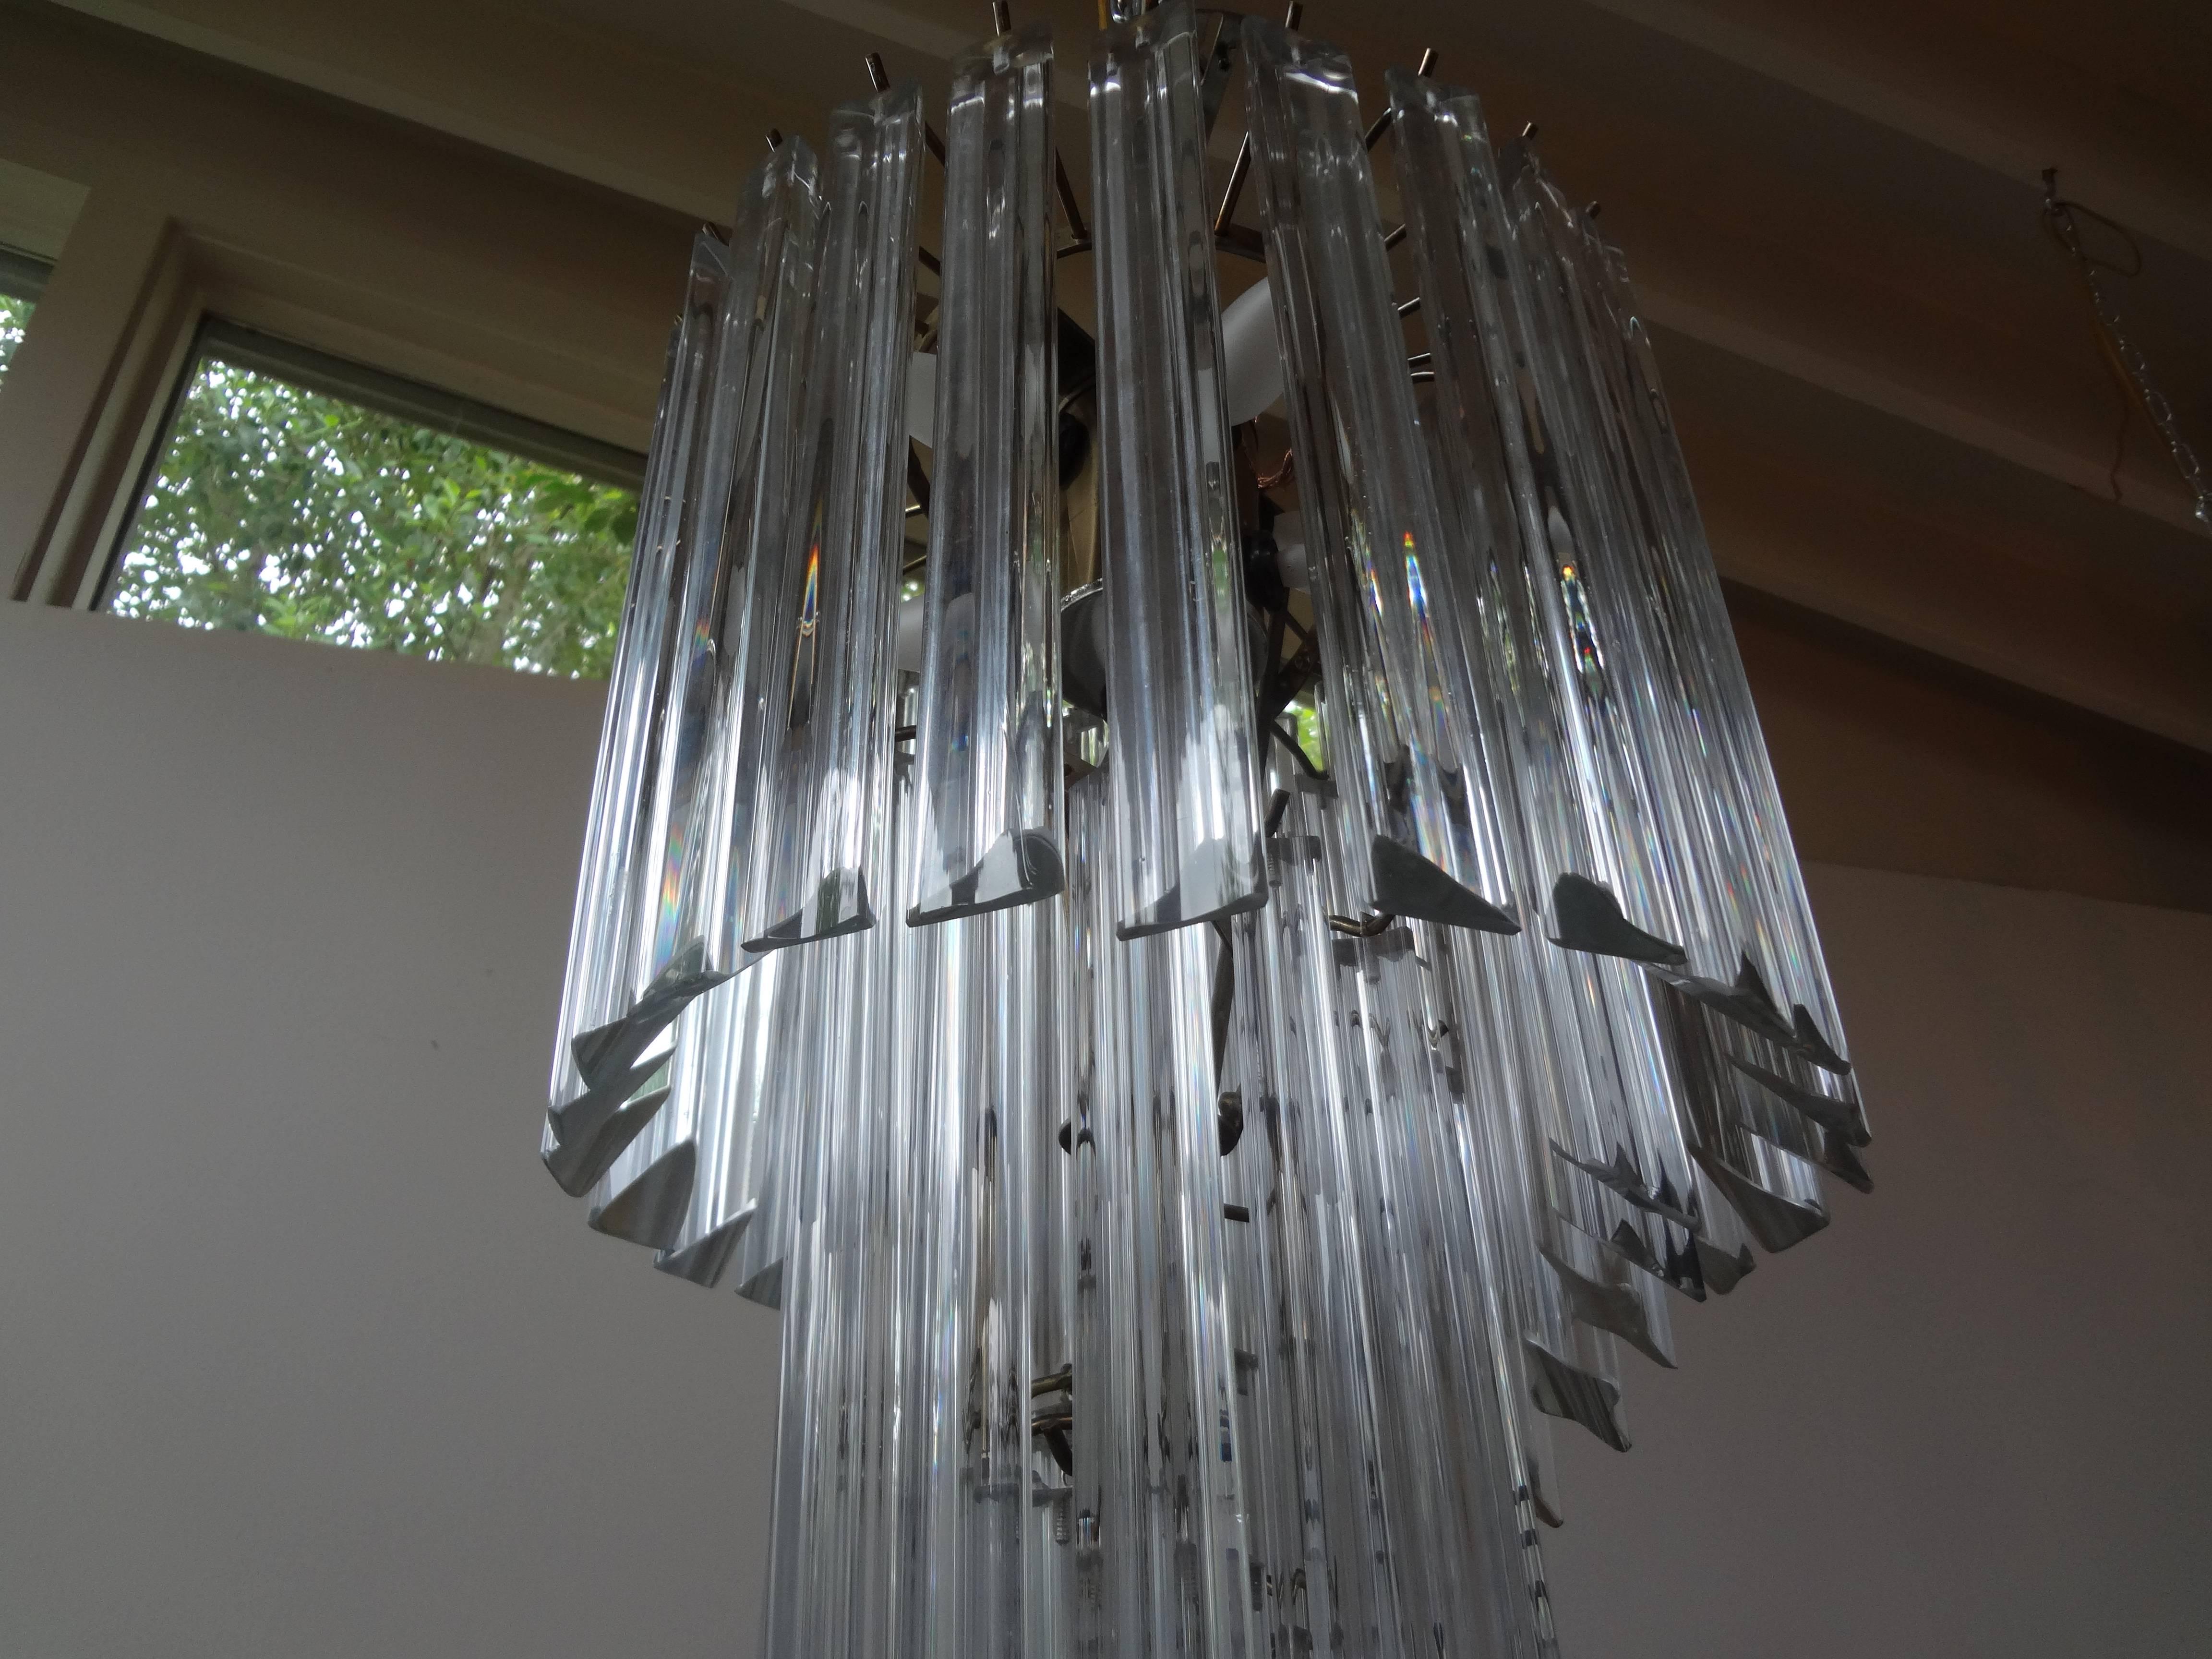 Venini inspired Murano spiral chandelier.
Italian midcentury Murano Venini style glass spiral chandelier with clear prisms on a chrome structure. This Murano chandelier is newly wired for US market. This Murano glass lantern, pendant or chandelier